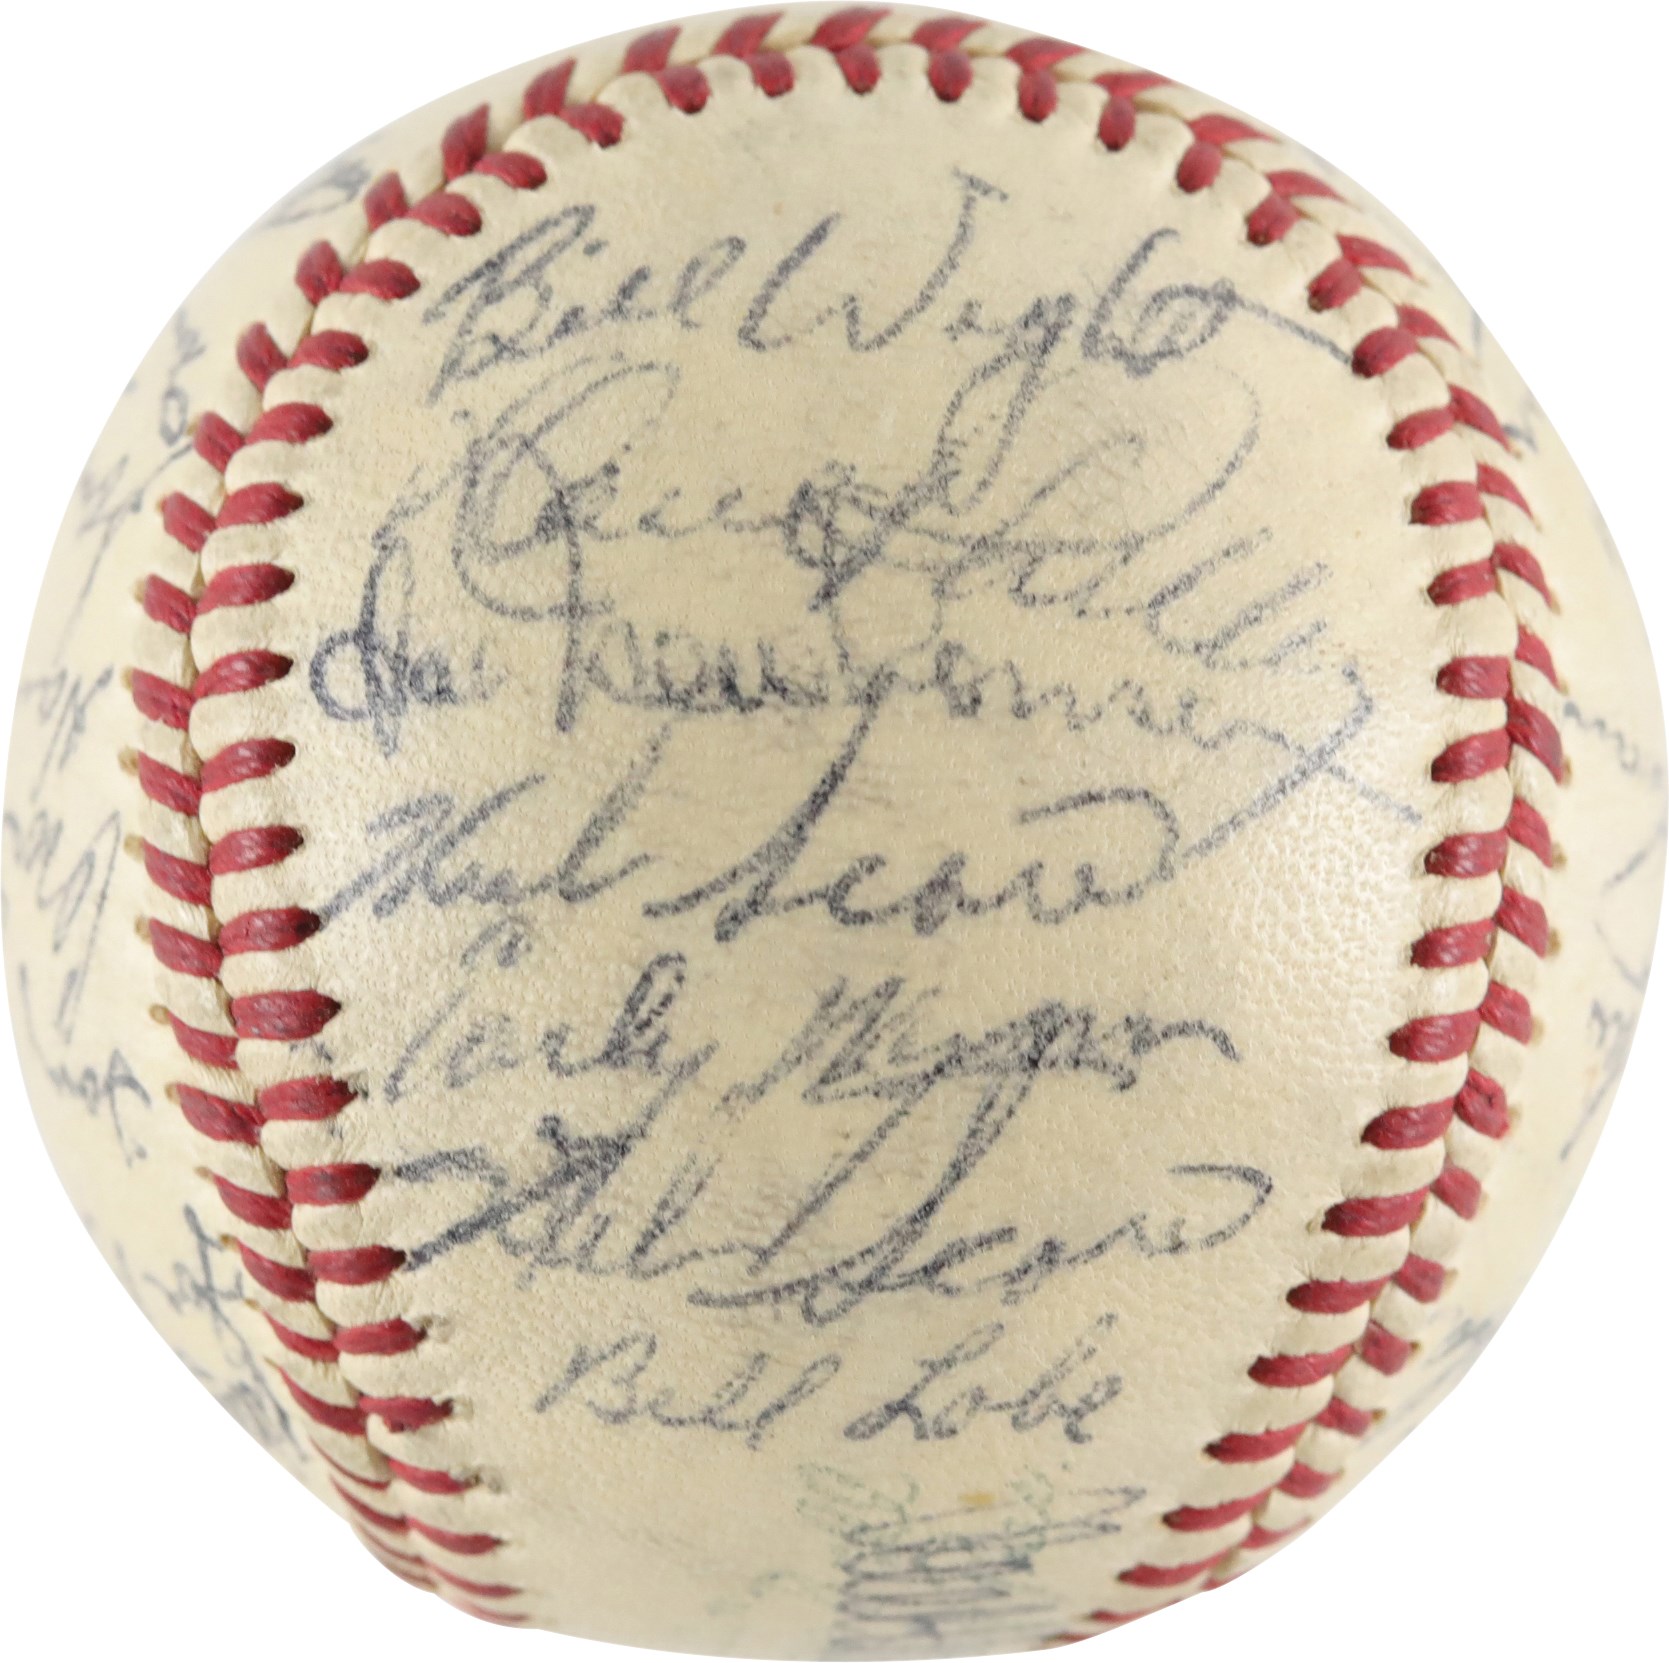 - 1955 Cleveland Indians High Grade Team-Signed Baseball w/Two Herb Score Rookie Autographs (PSA)